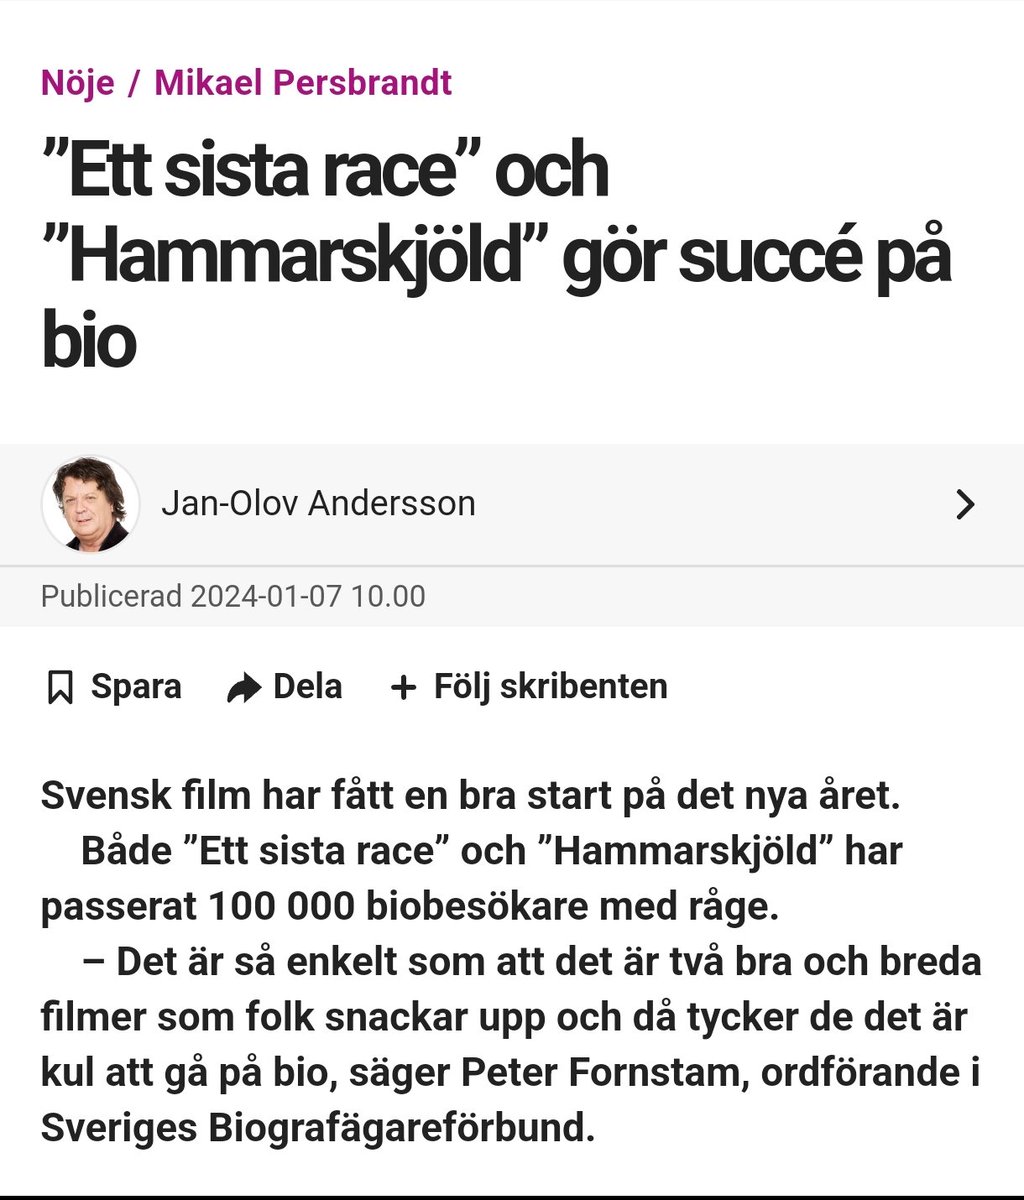 'Hammarrace', the new 'Barbenheimer' in Sweden. Two of Swedens latest movies are killing it at the box office in Sweden. Our greatest and biggest cinema owner @FilmstadenAB is owned by @AMCTheatres #amc $amc
AMC is now making cash in Sweden.
That was not the case in 2022
🩳🏴‍☠️💀